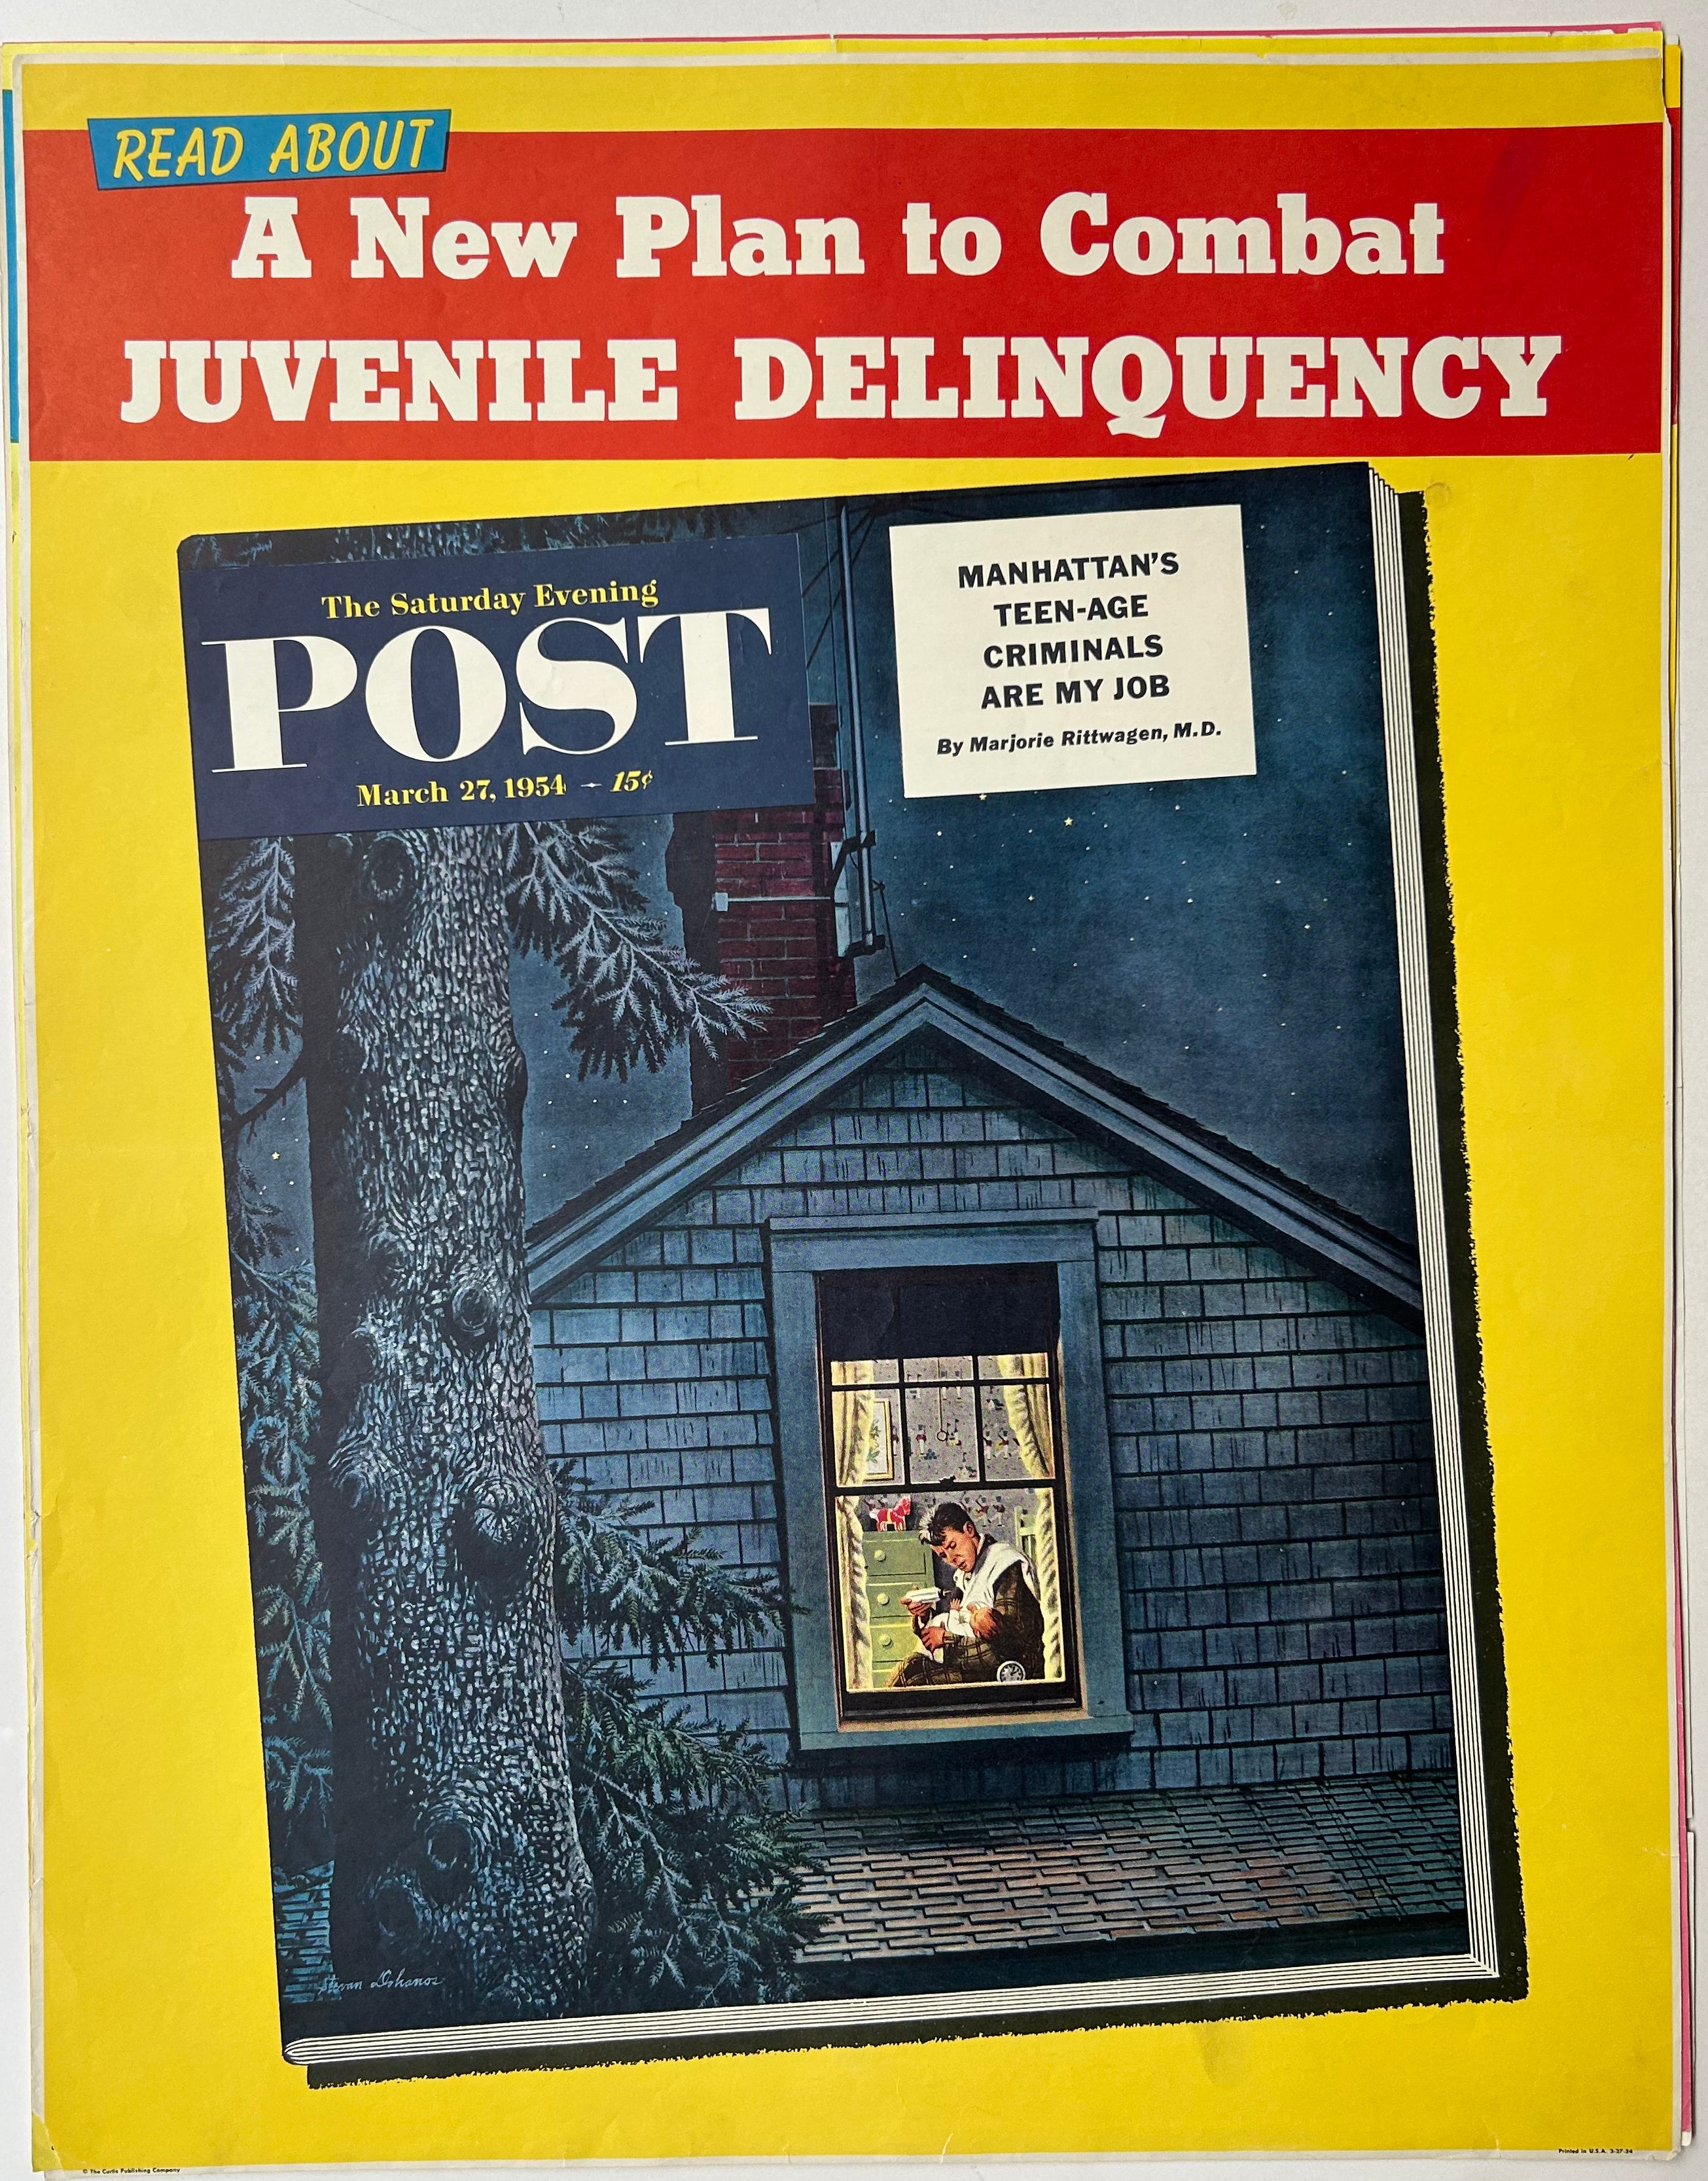 Saturday Evening Post March 27, 1954 ✓